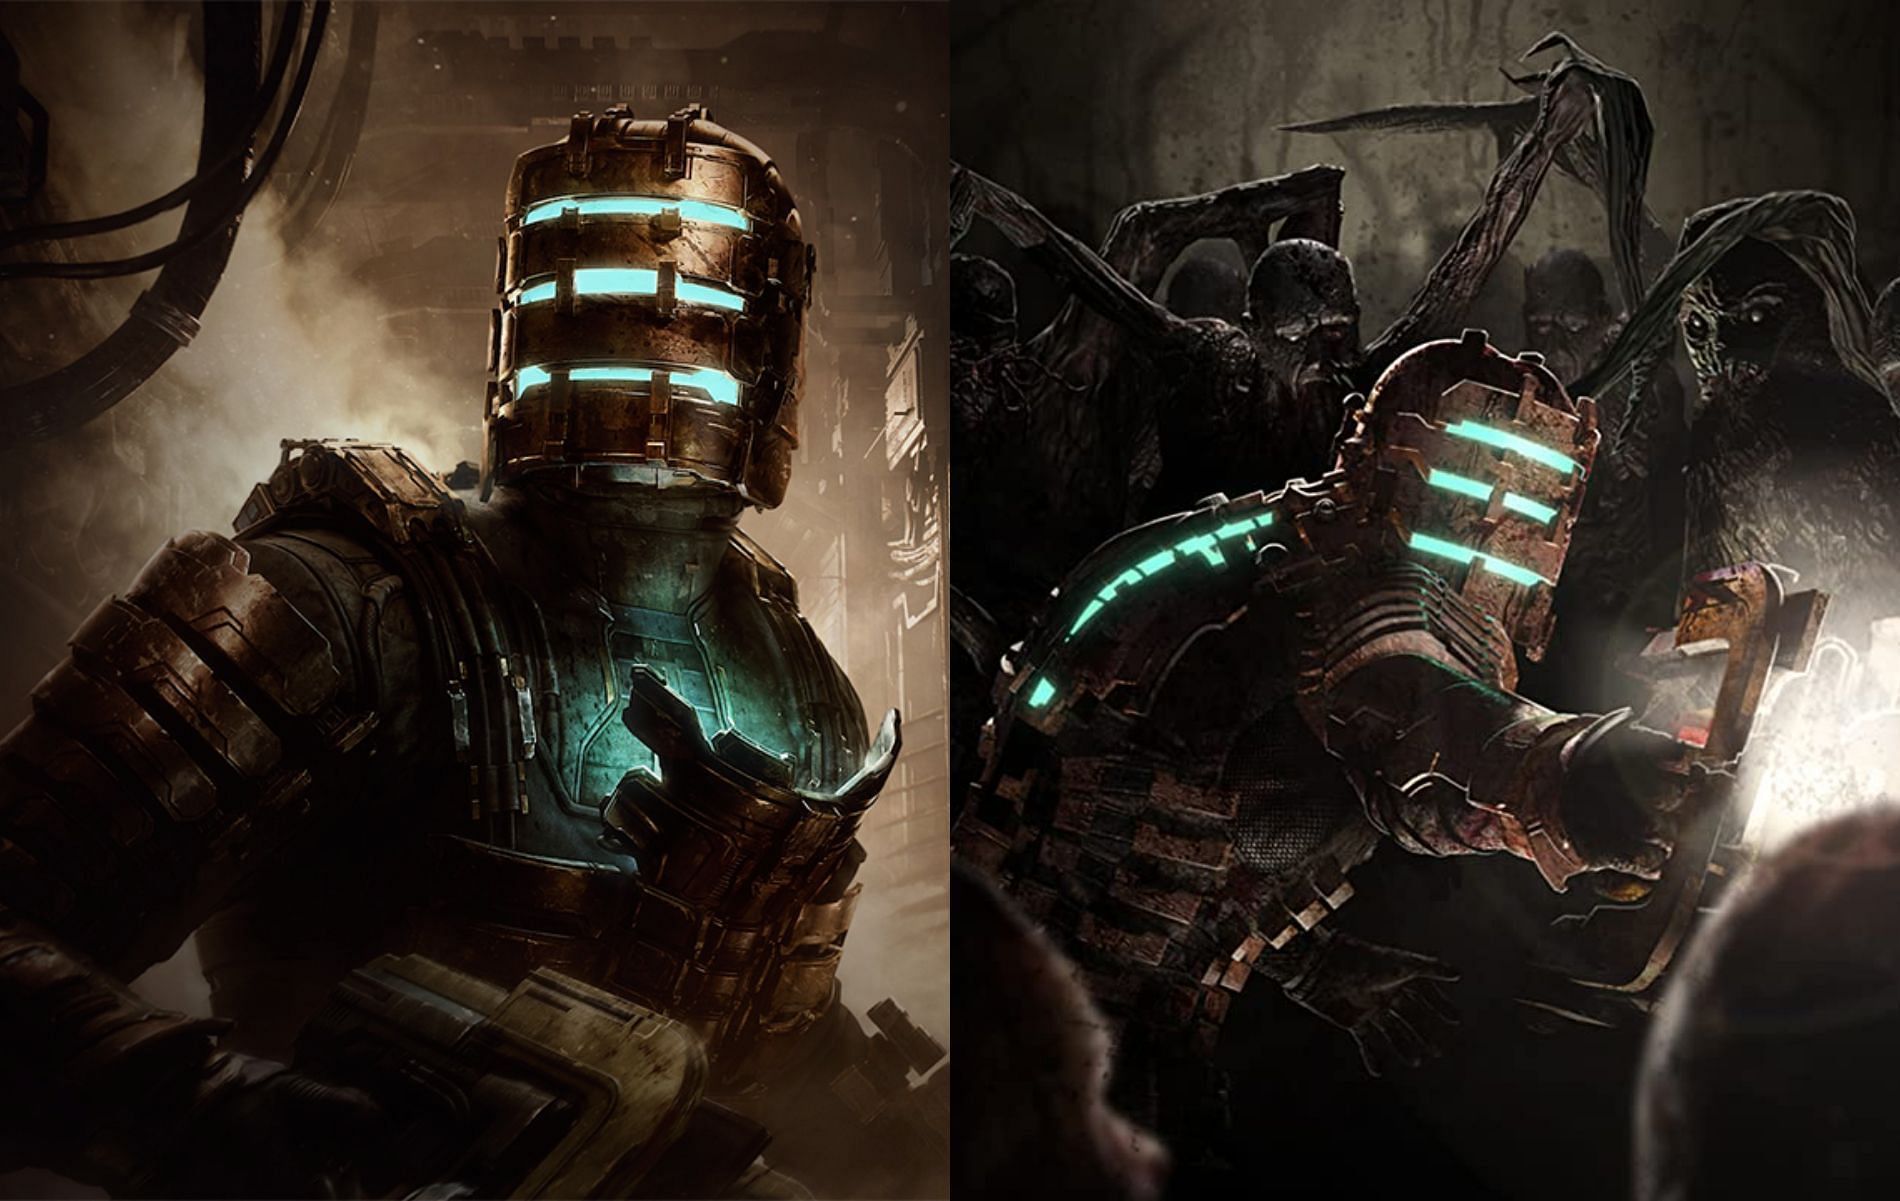 Dead Space PS5 Remake Will Be One Shot Like God of War